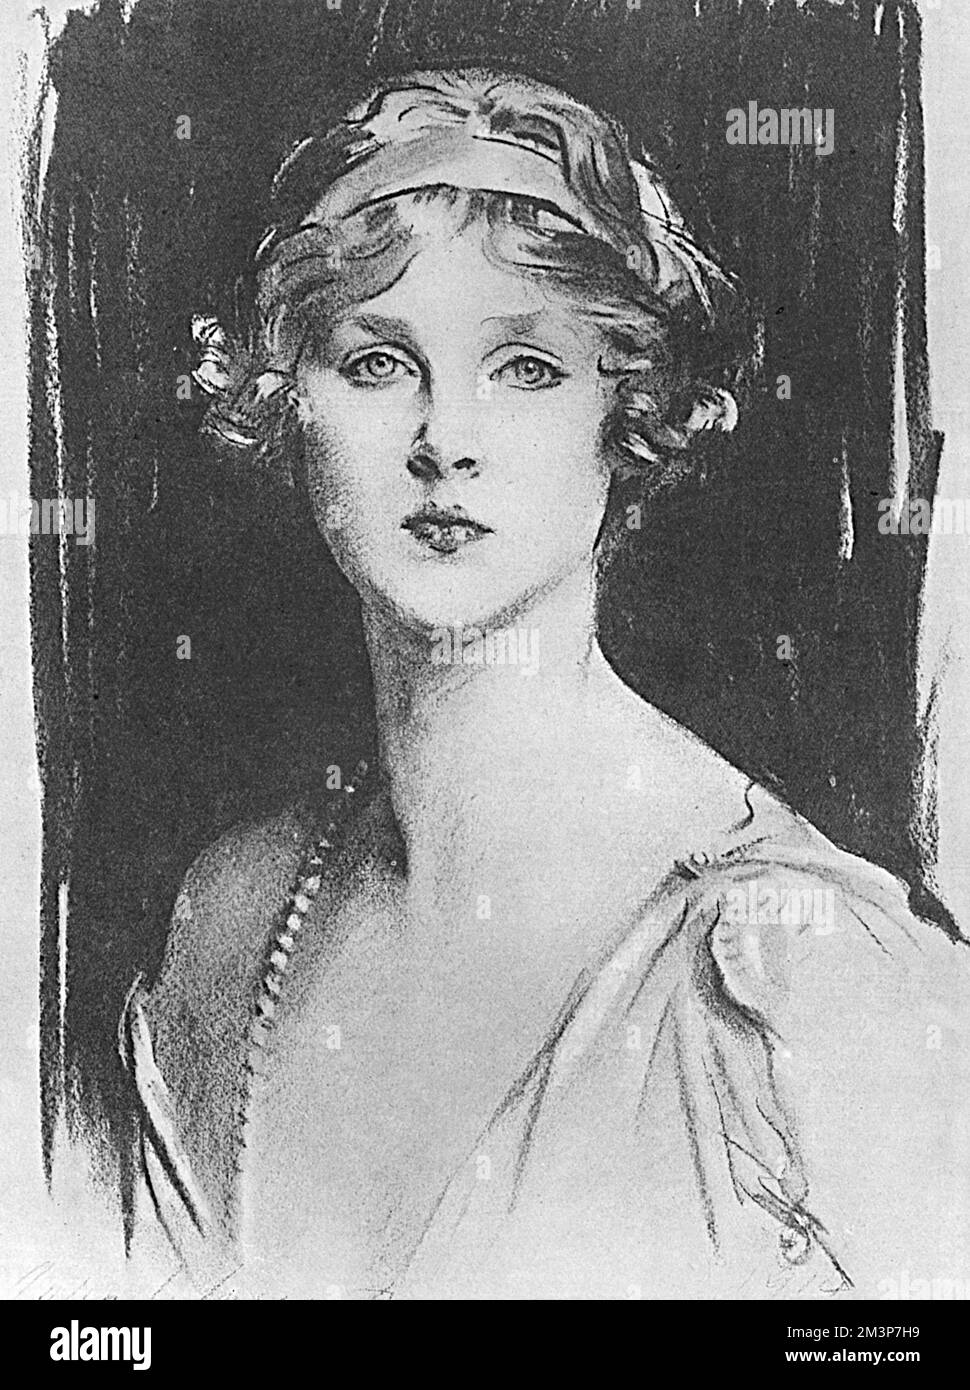 Lady Diana Manners (1891-1981), British society beauty, actress and wife of Duff Cooper.  Later became Lady Duff Cooper, Viscountess Norwich.  A portrait study by John Singer Sargent.  The Tatler reports on her having a stall at the Souvenir Luncheon at Grosvenor House where 'Lady Diana will sell the Three Arts toys (in aid of the Three Arts Women's Employment Fund), and will probably enjoy her usual success.'     Date: 1916 Stock Photo